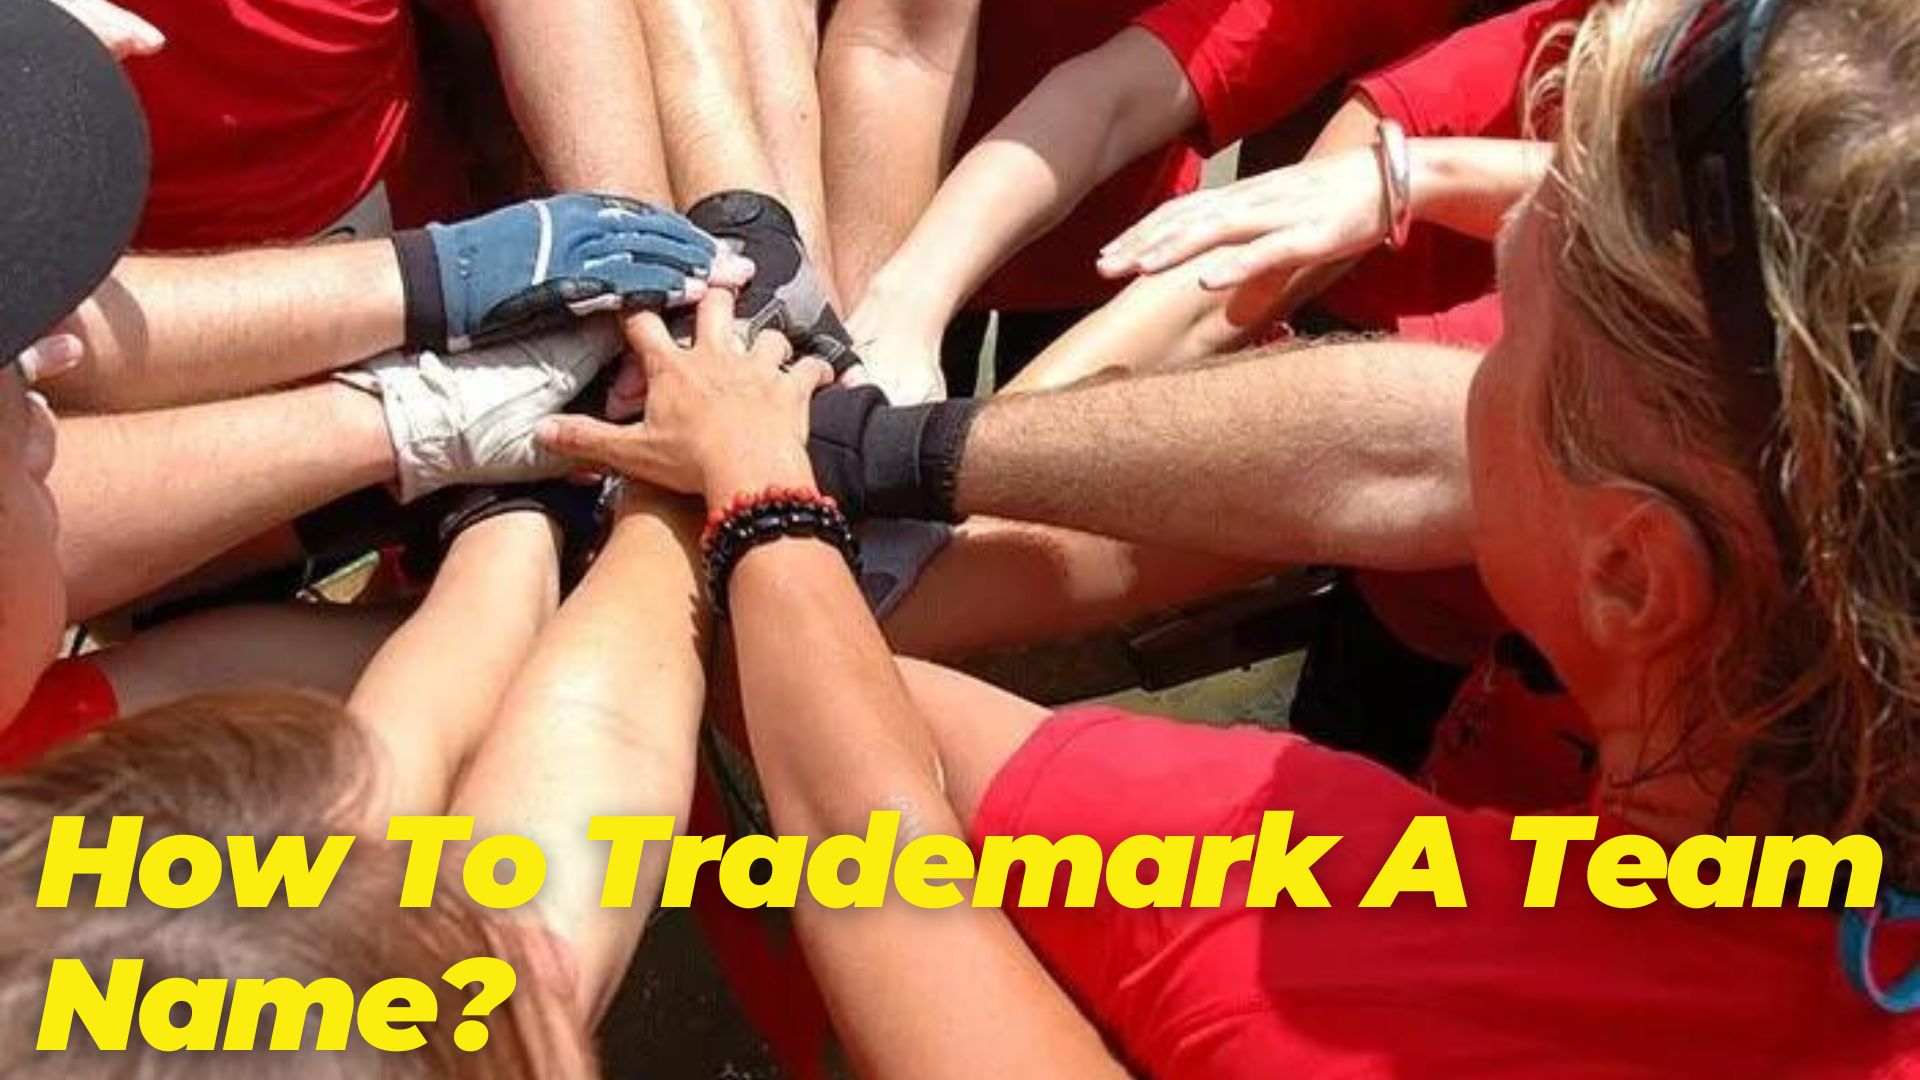 How To Trademark A Team Name?